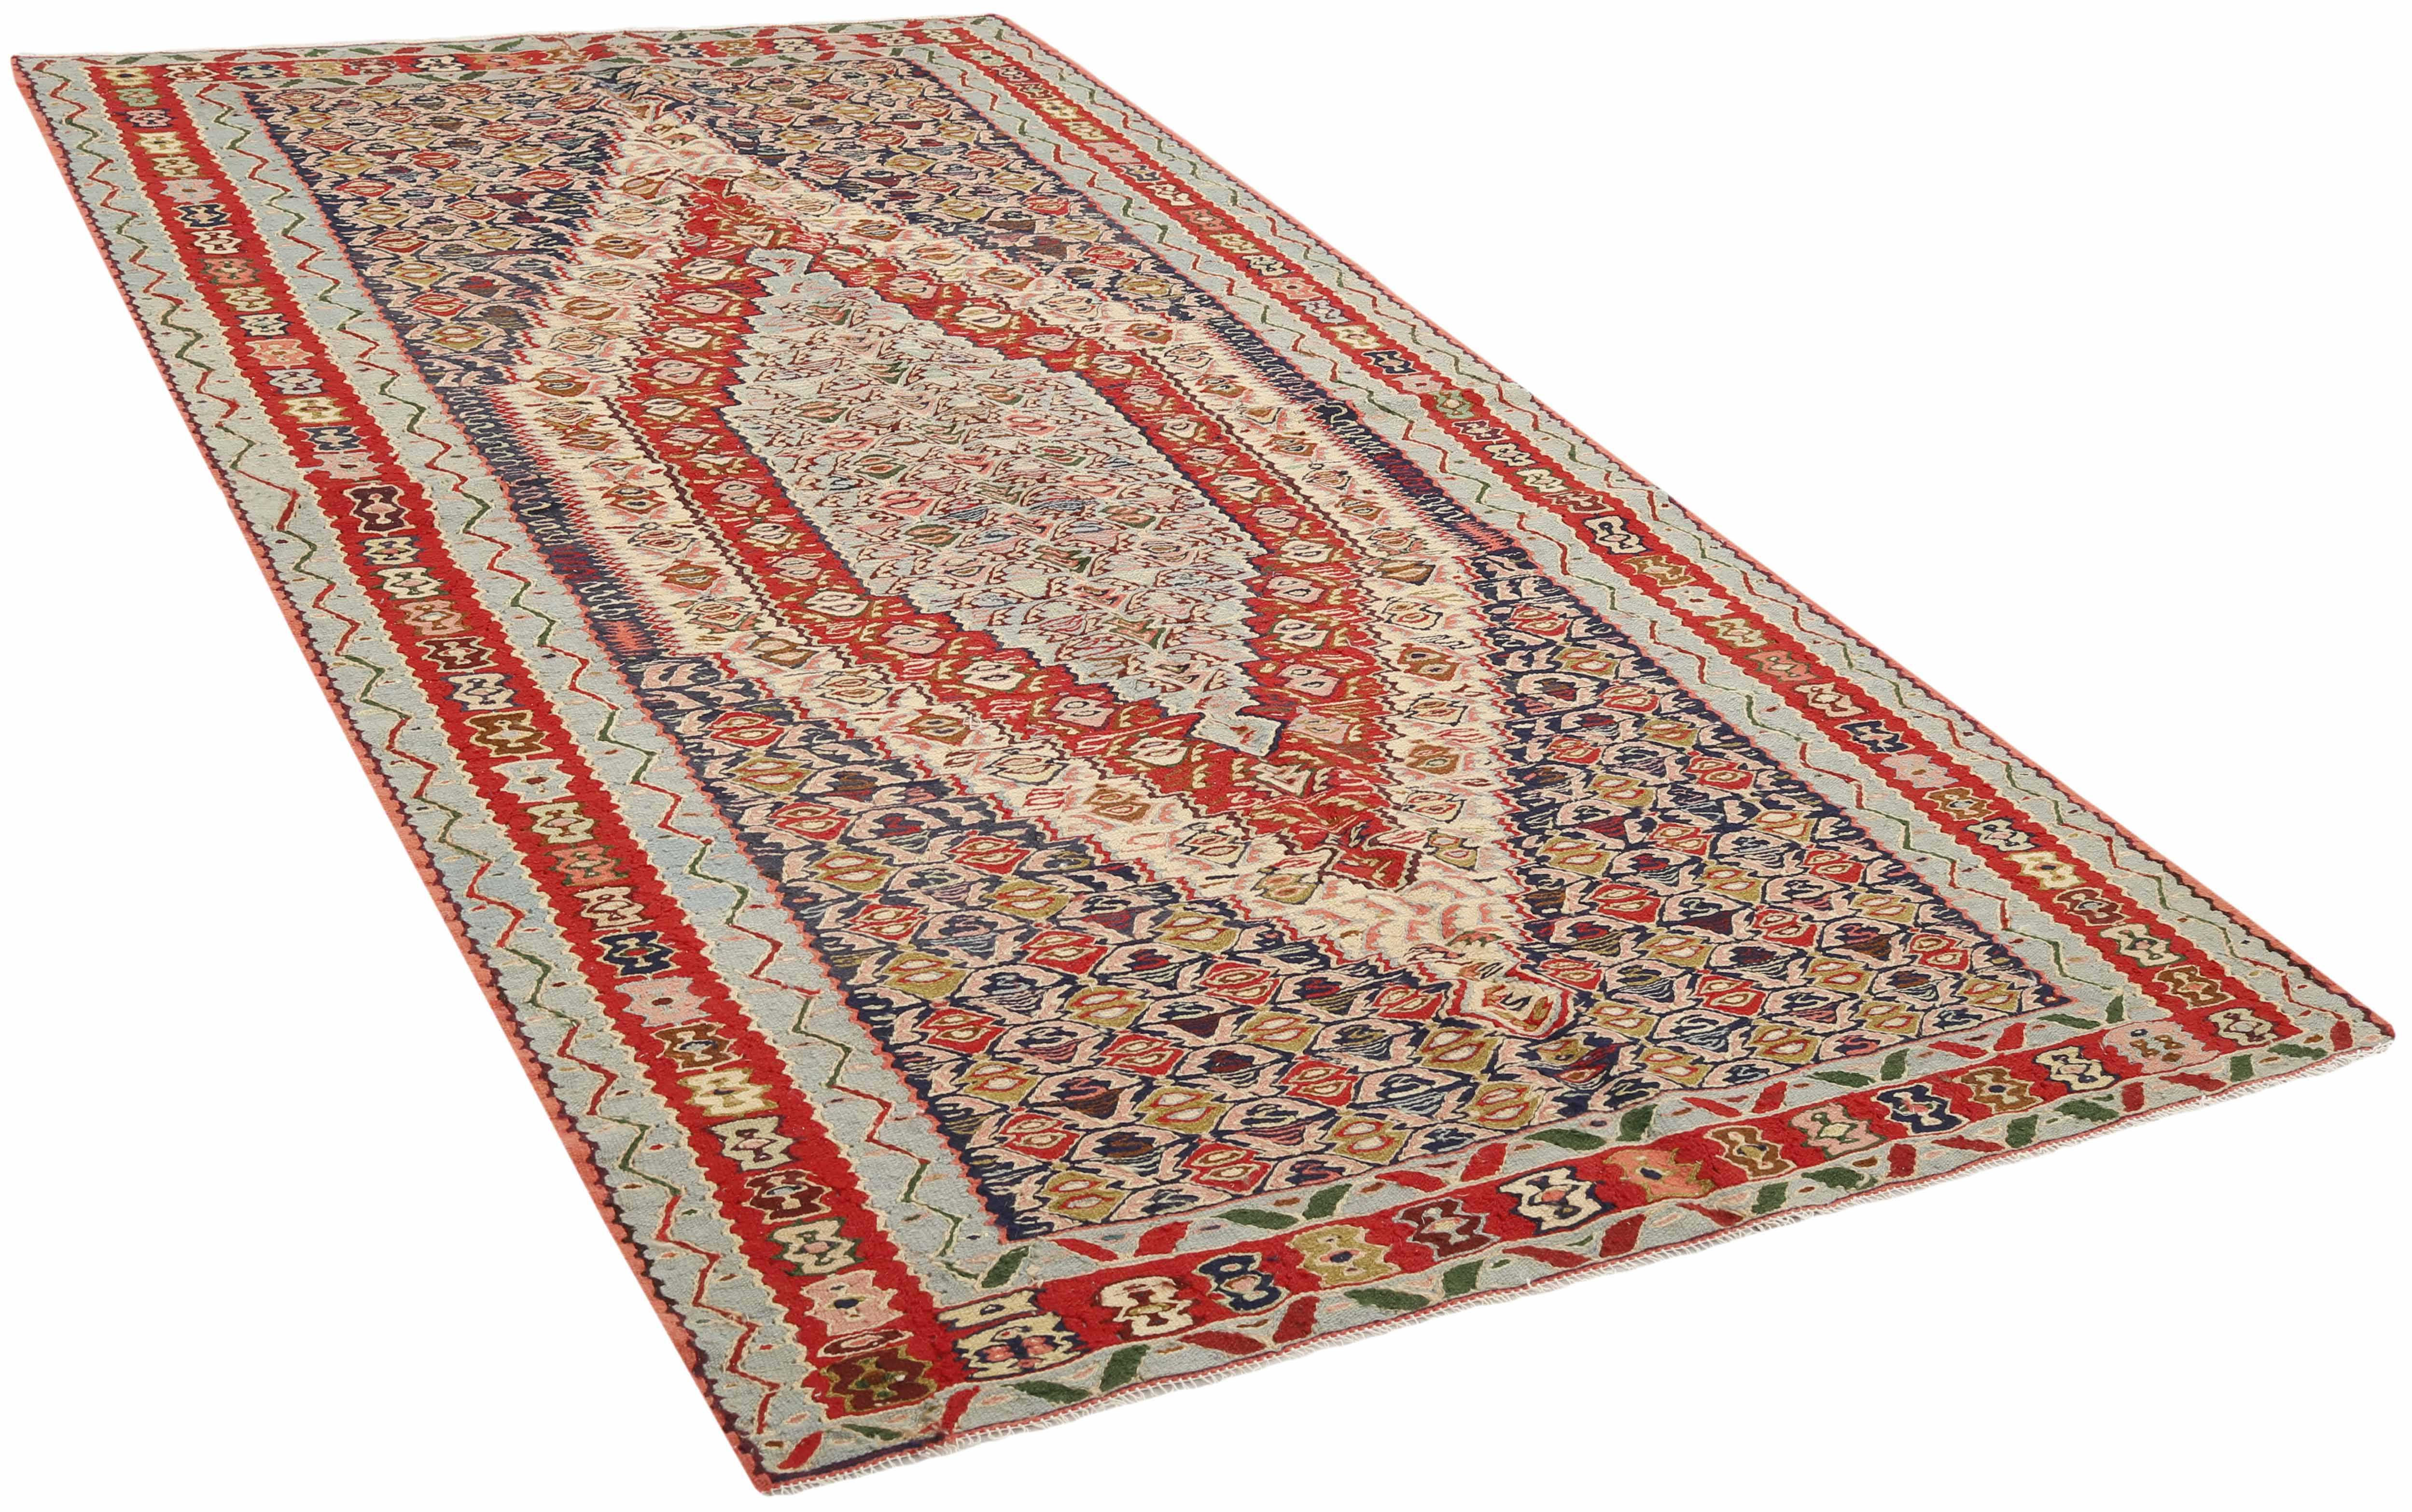 Authentic persian kelim flatweave rug with traditional geometric floral design in multicolour